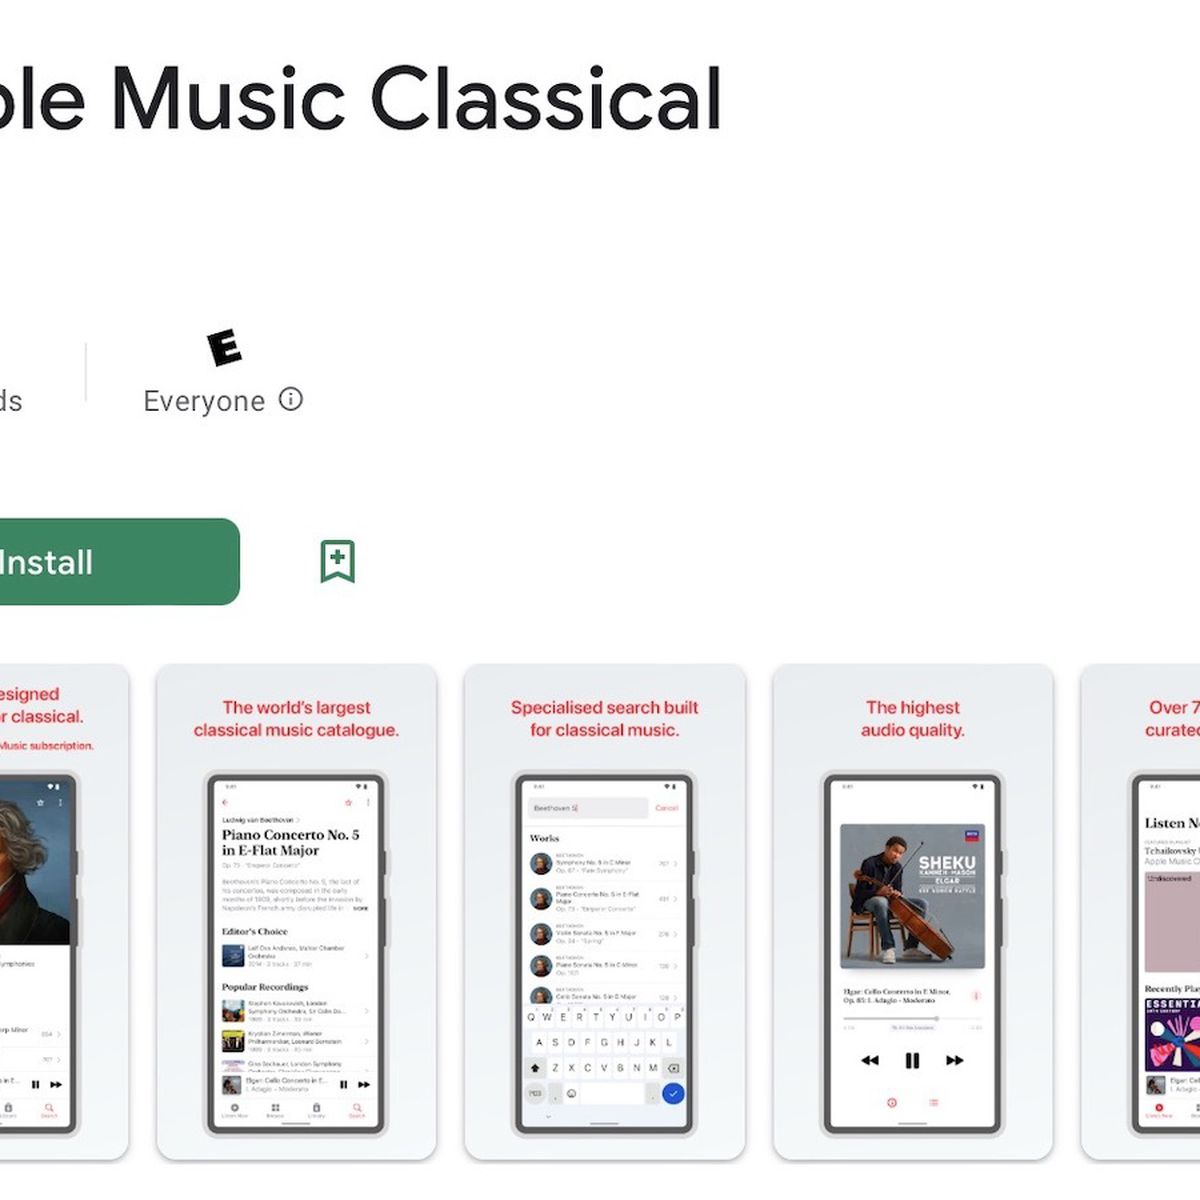 Apple Music Classical now available on android. (Sorry if repost